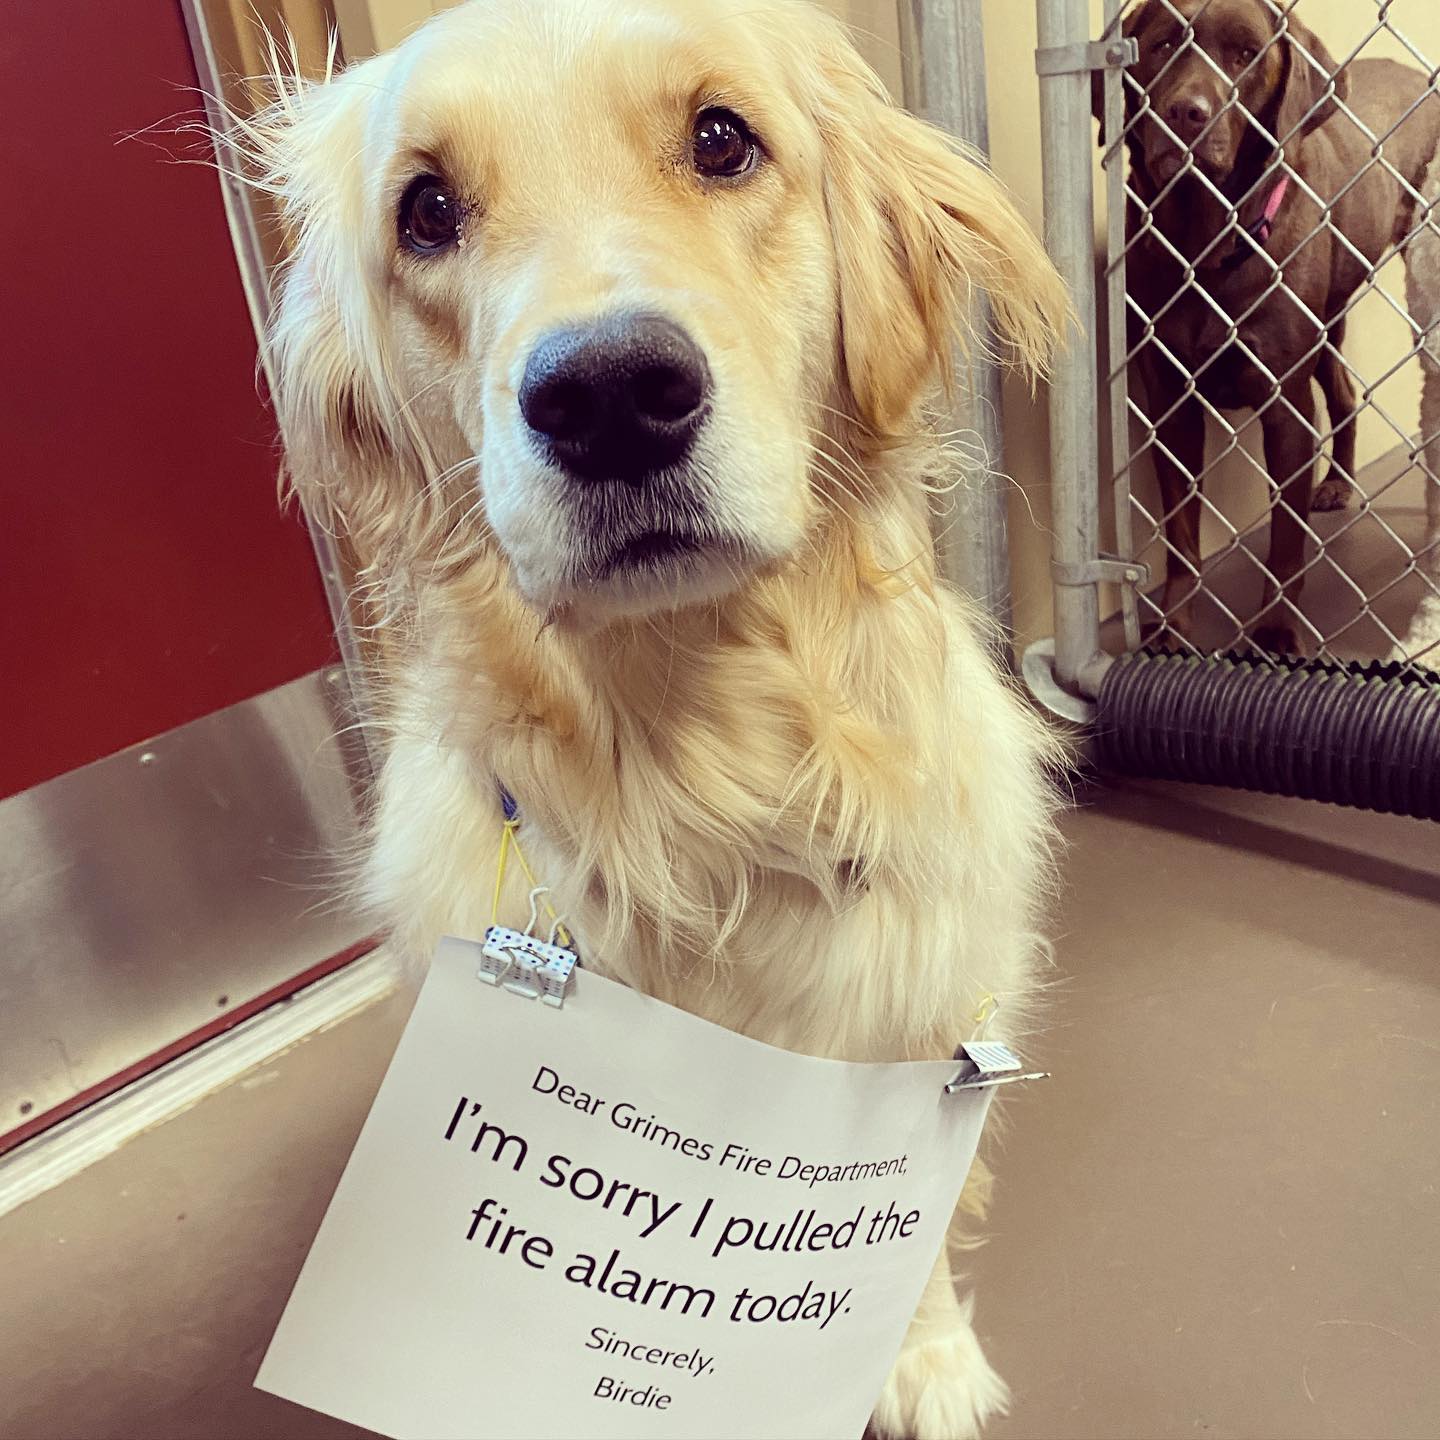 Birdie the golden retriever wearing a sign that says "I'm sorry I pulled the fire alarm today. Sincerely, Birdie."